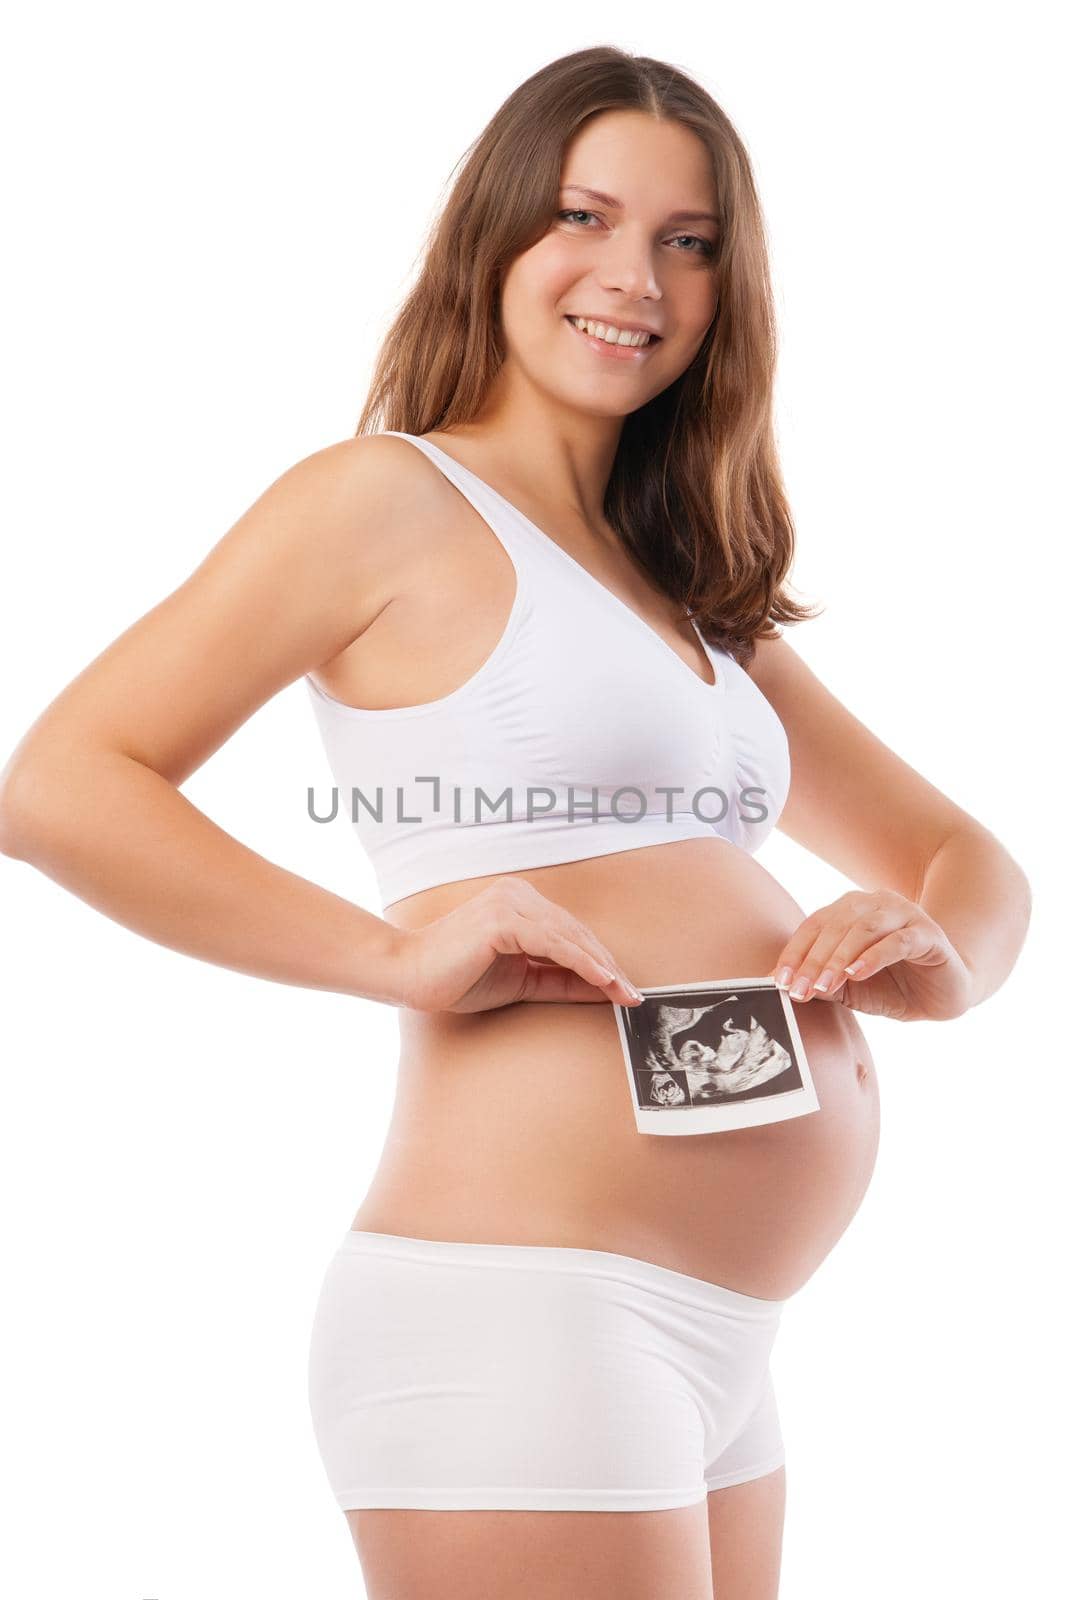 Pregnant woman is holding photo of her Ultrasound by Julenochek